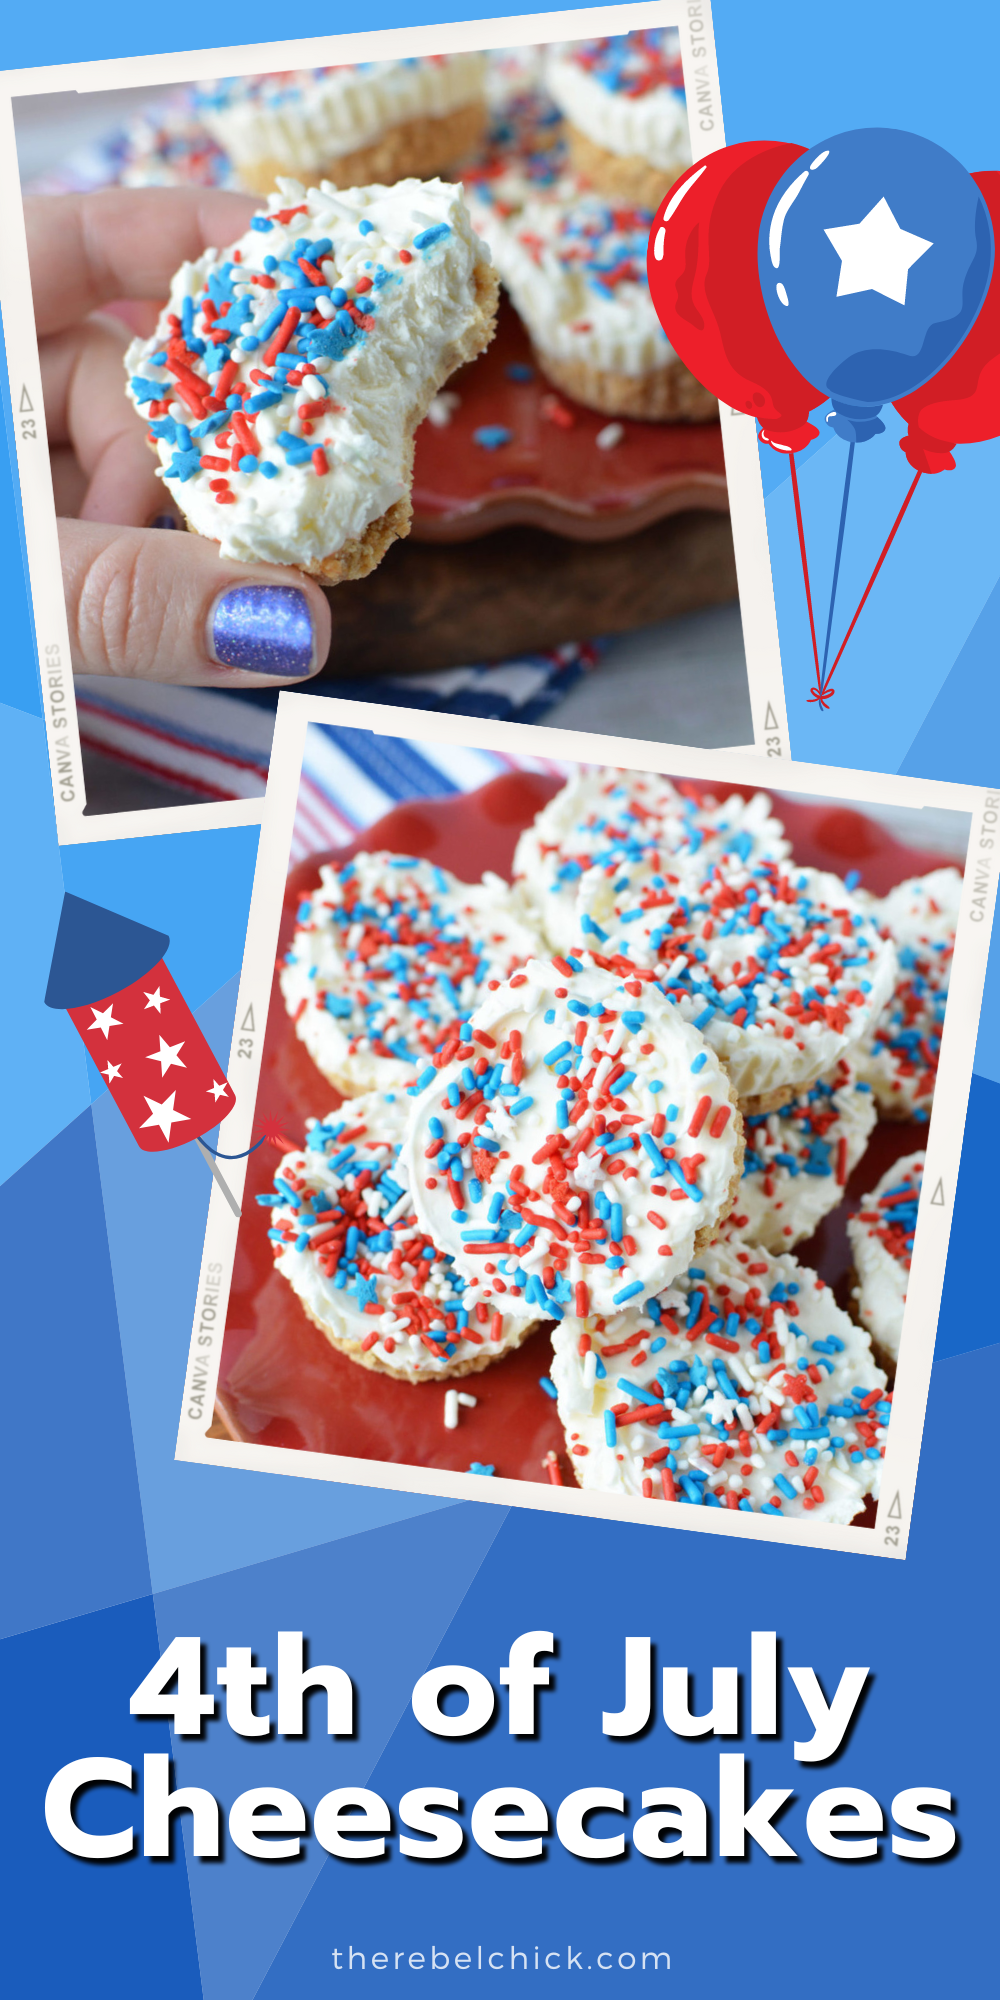 4th of July Cheesecakes Recipe